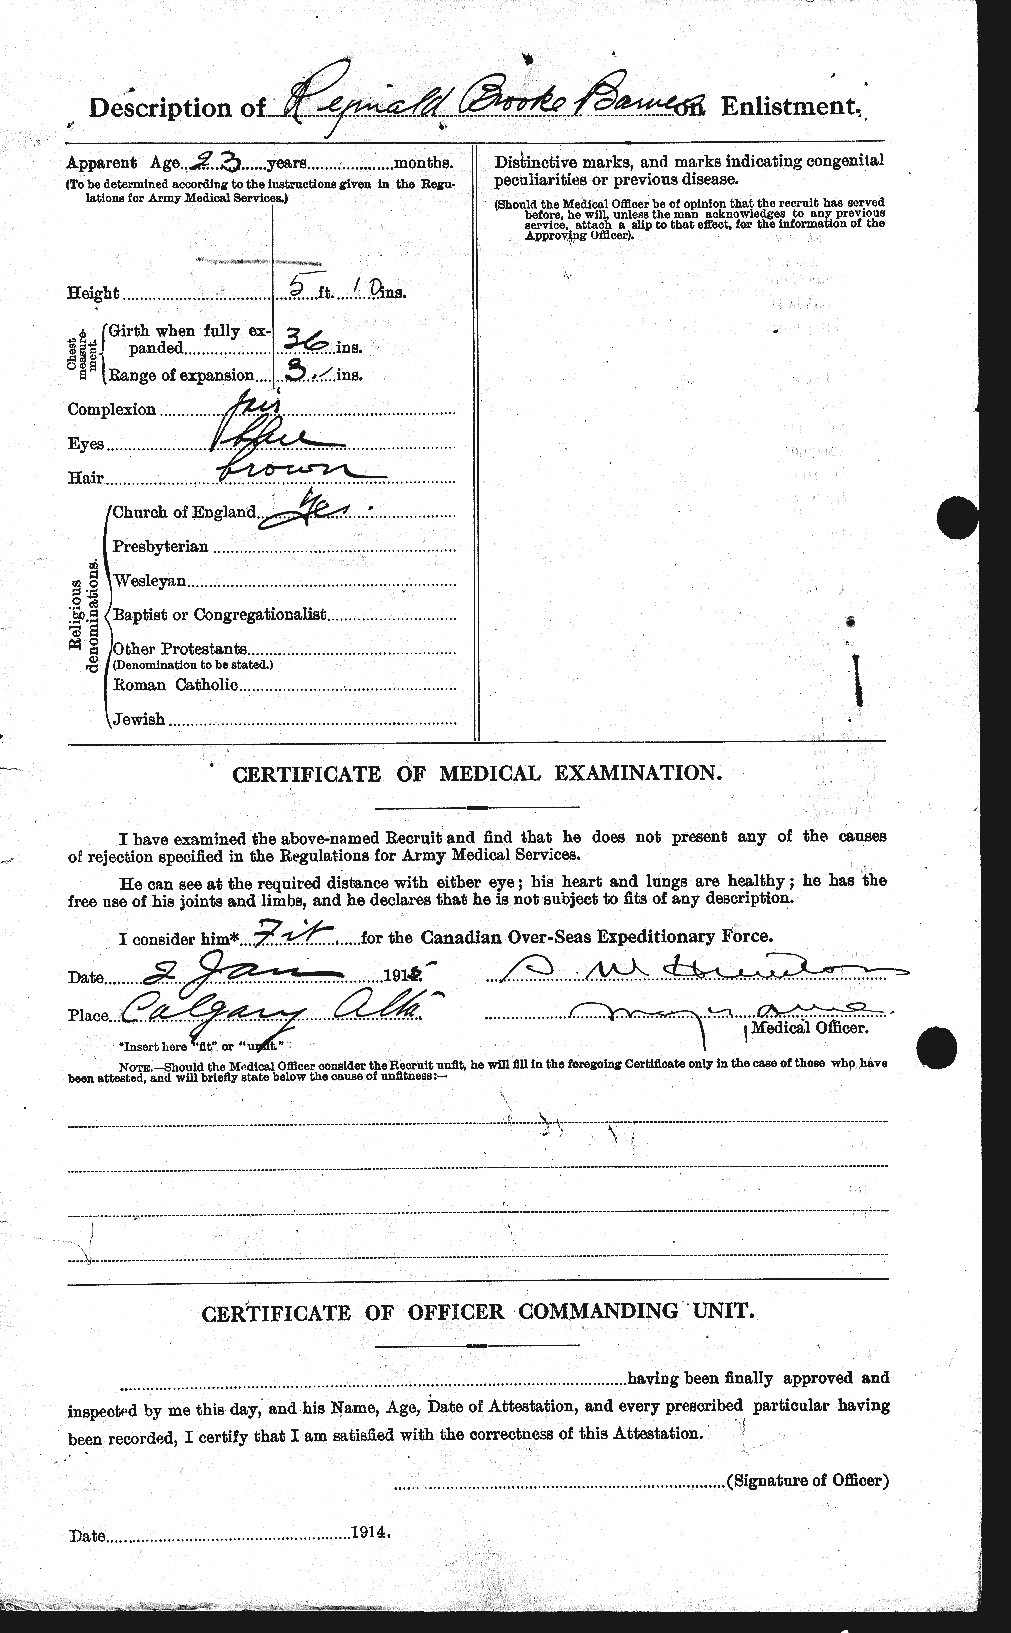 Personnel Records of the First World War - CEF 227387b